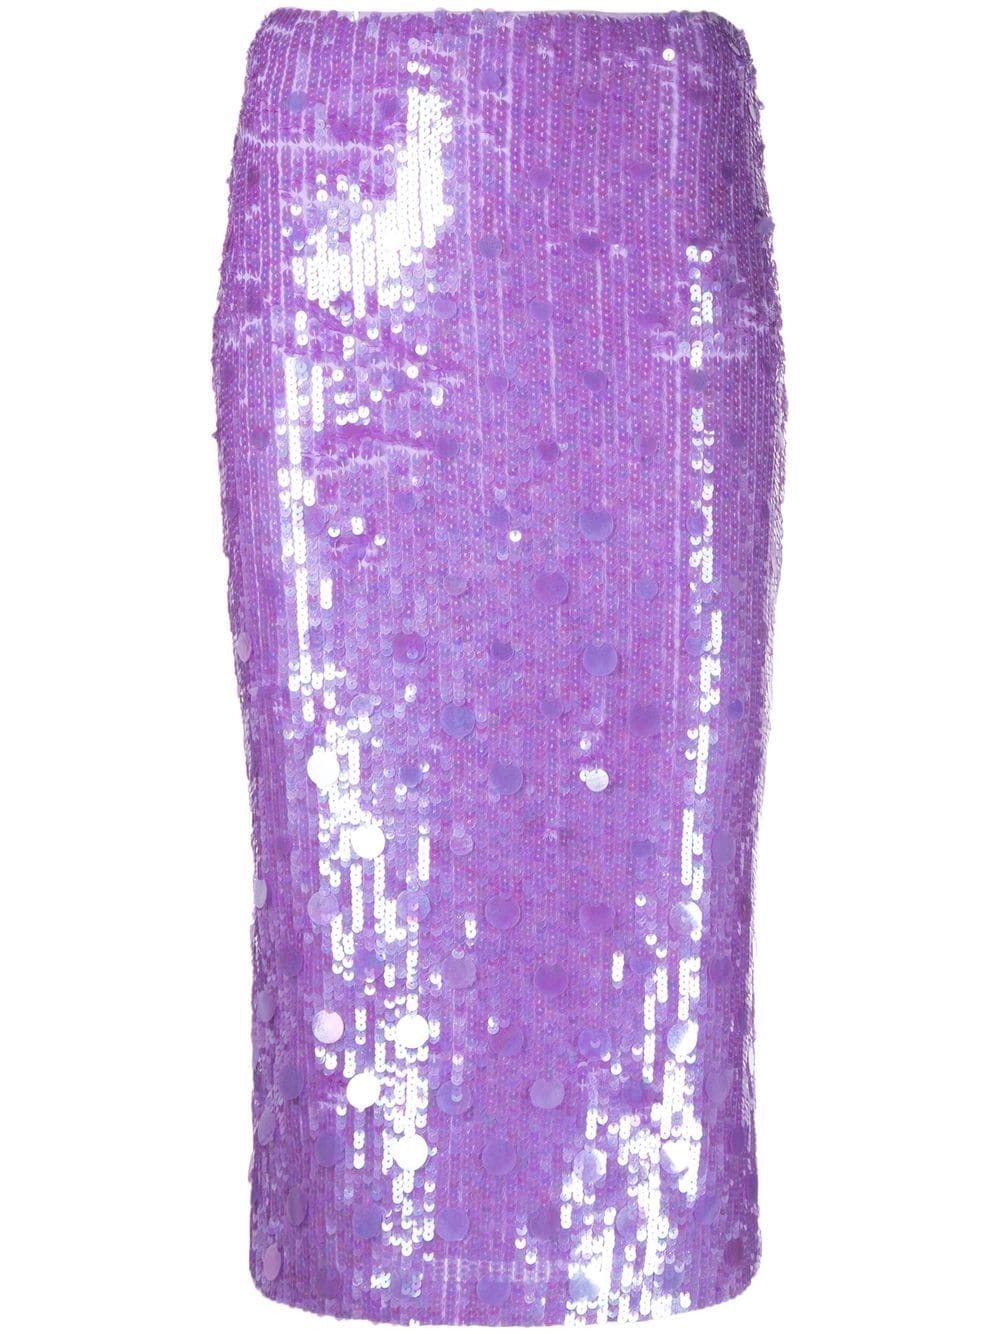 P.A.R.O.S.H SEQUIN-EMBELLISHED PENCIL SKIRT